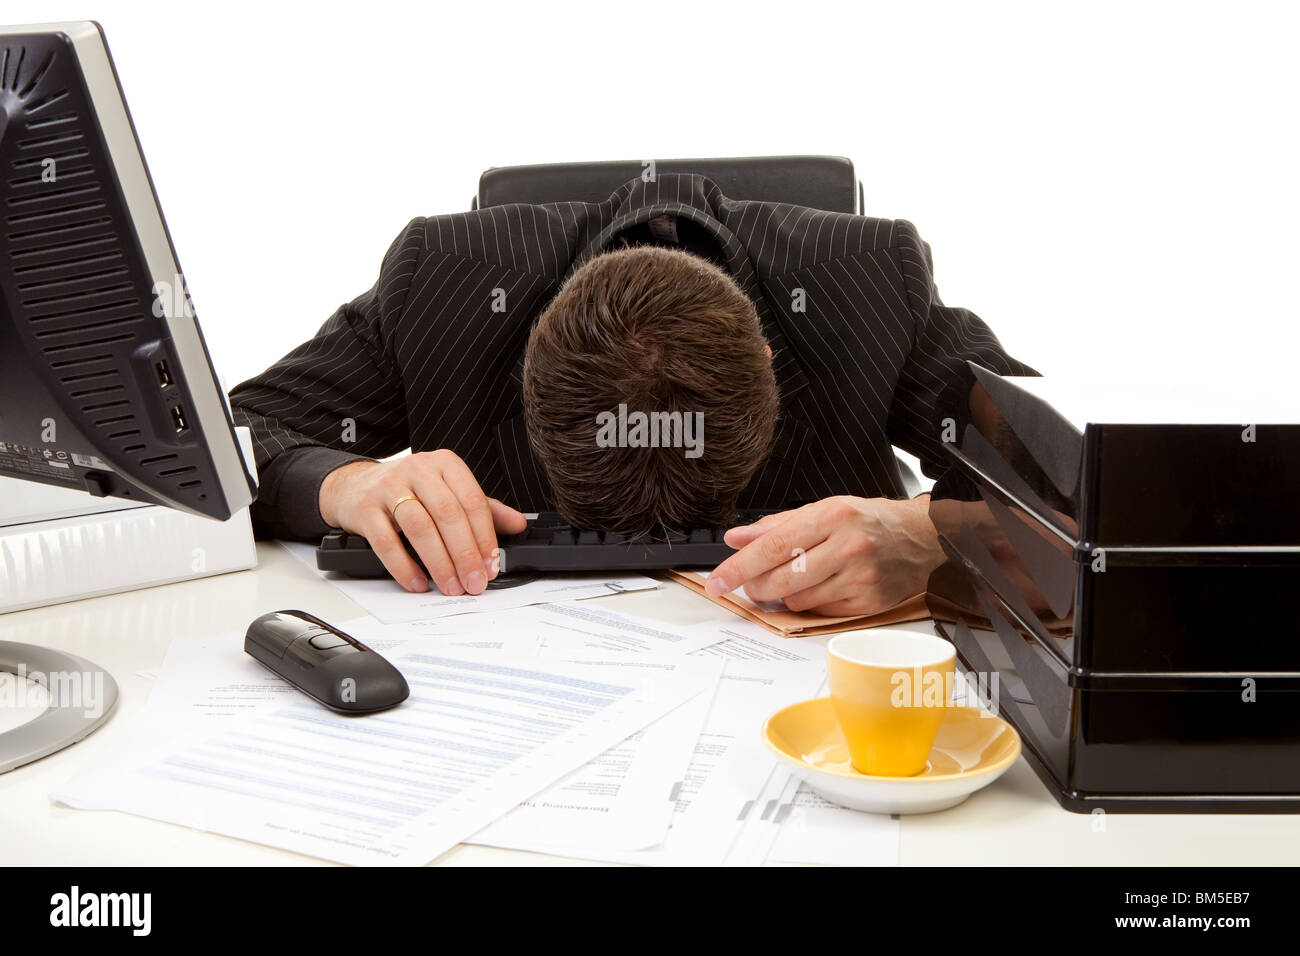 Businessman lies with head on his desk, overwrought and sleeping, over white background Stock Photo